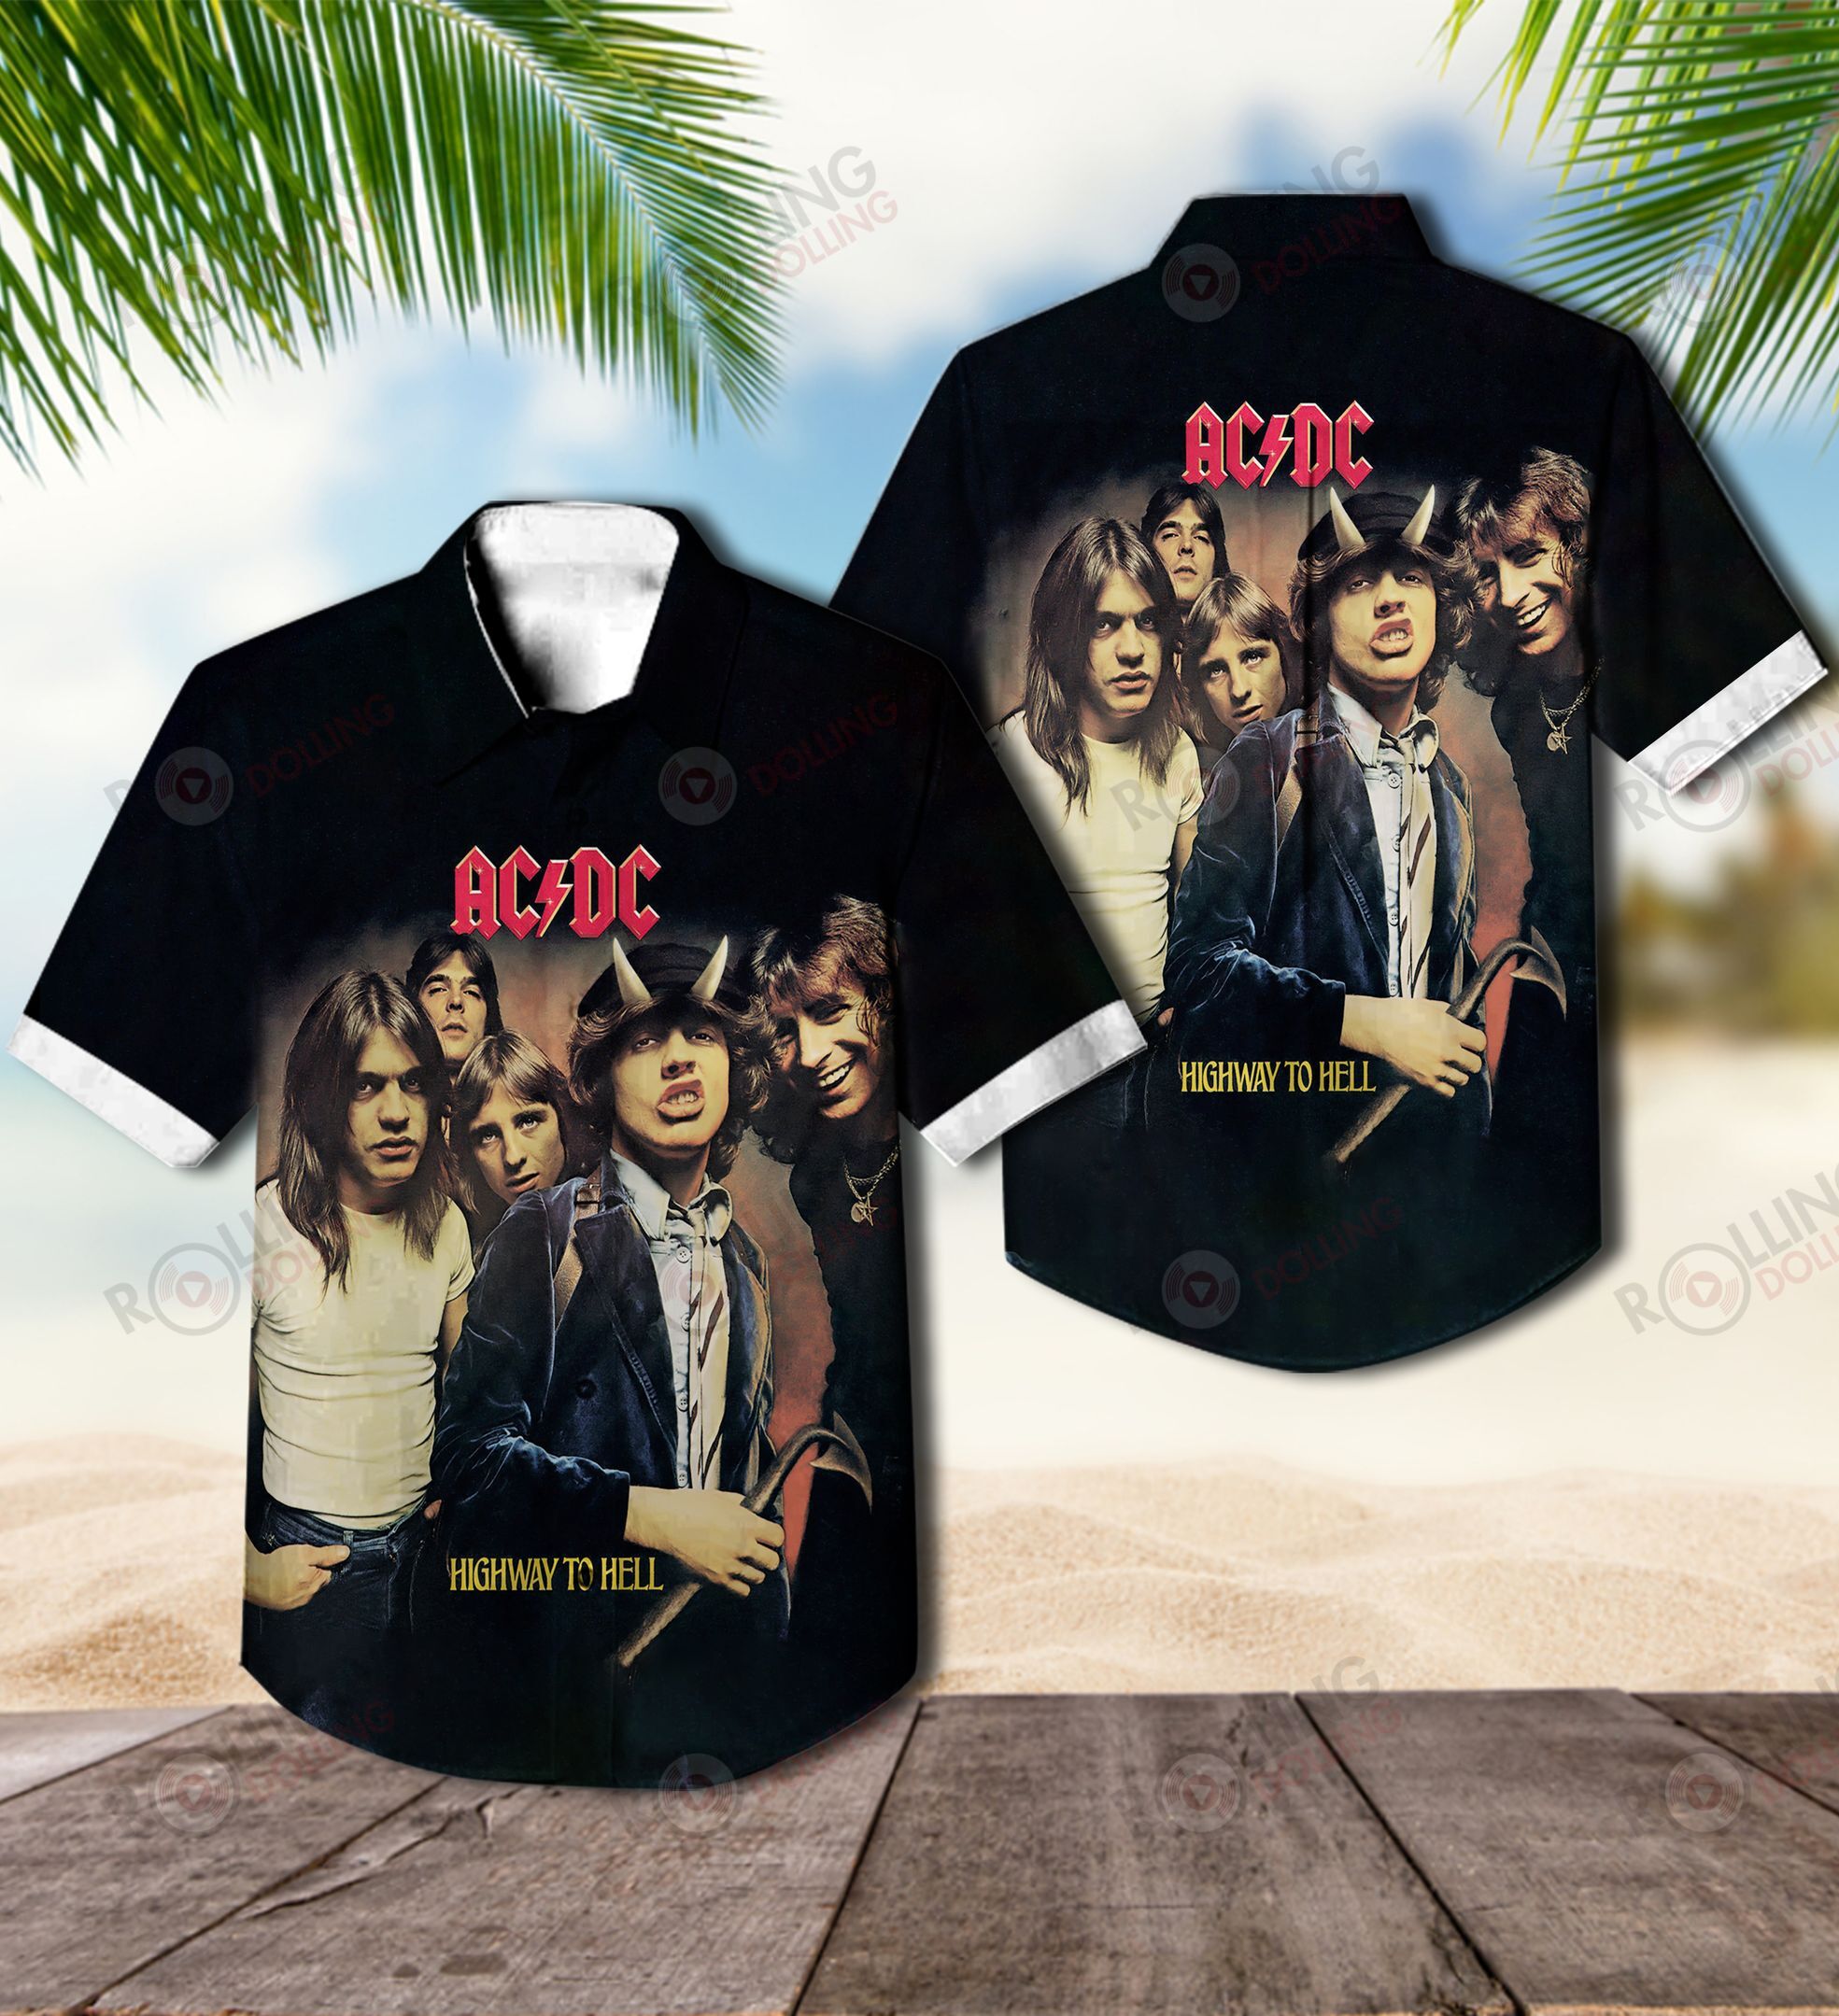 This would make a great gift for any fan who loves Hawaiian Shirt as well as Rock band 10